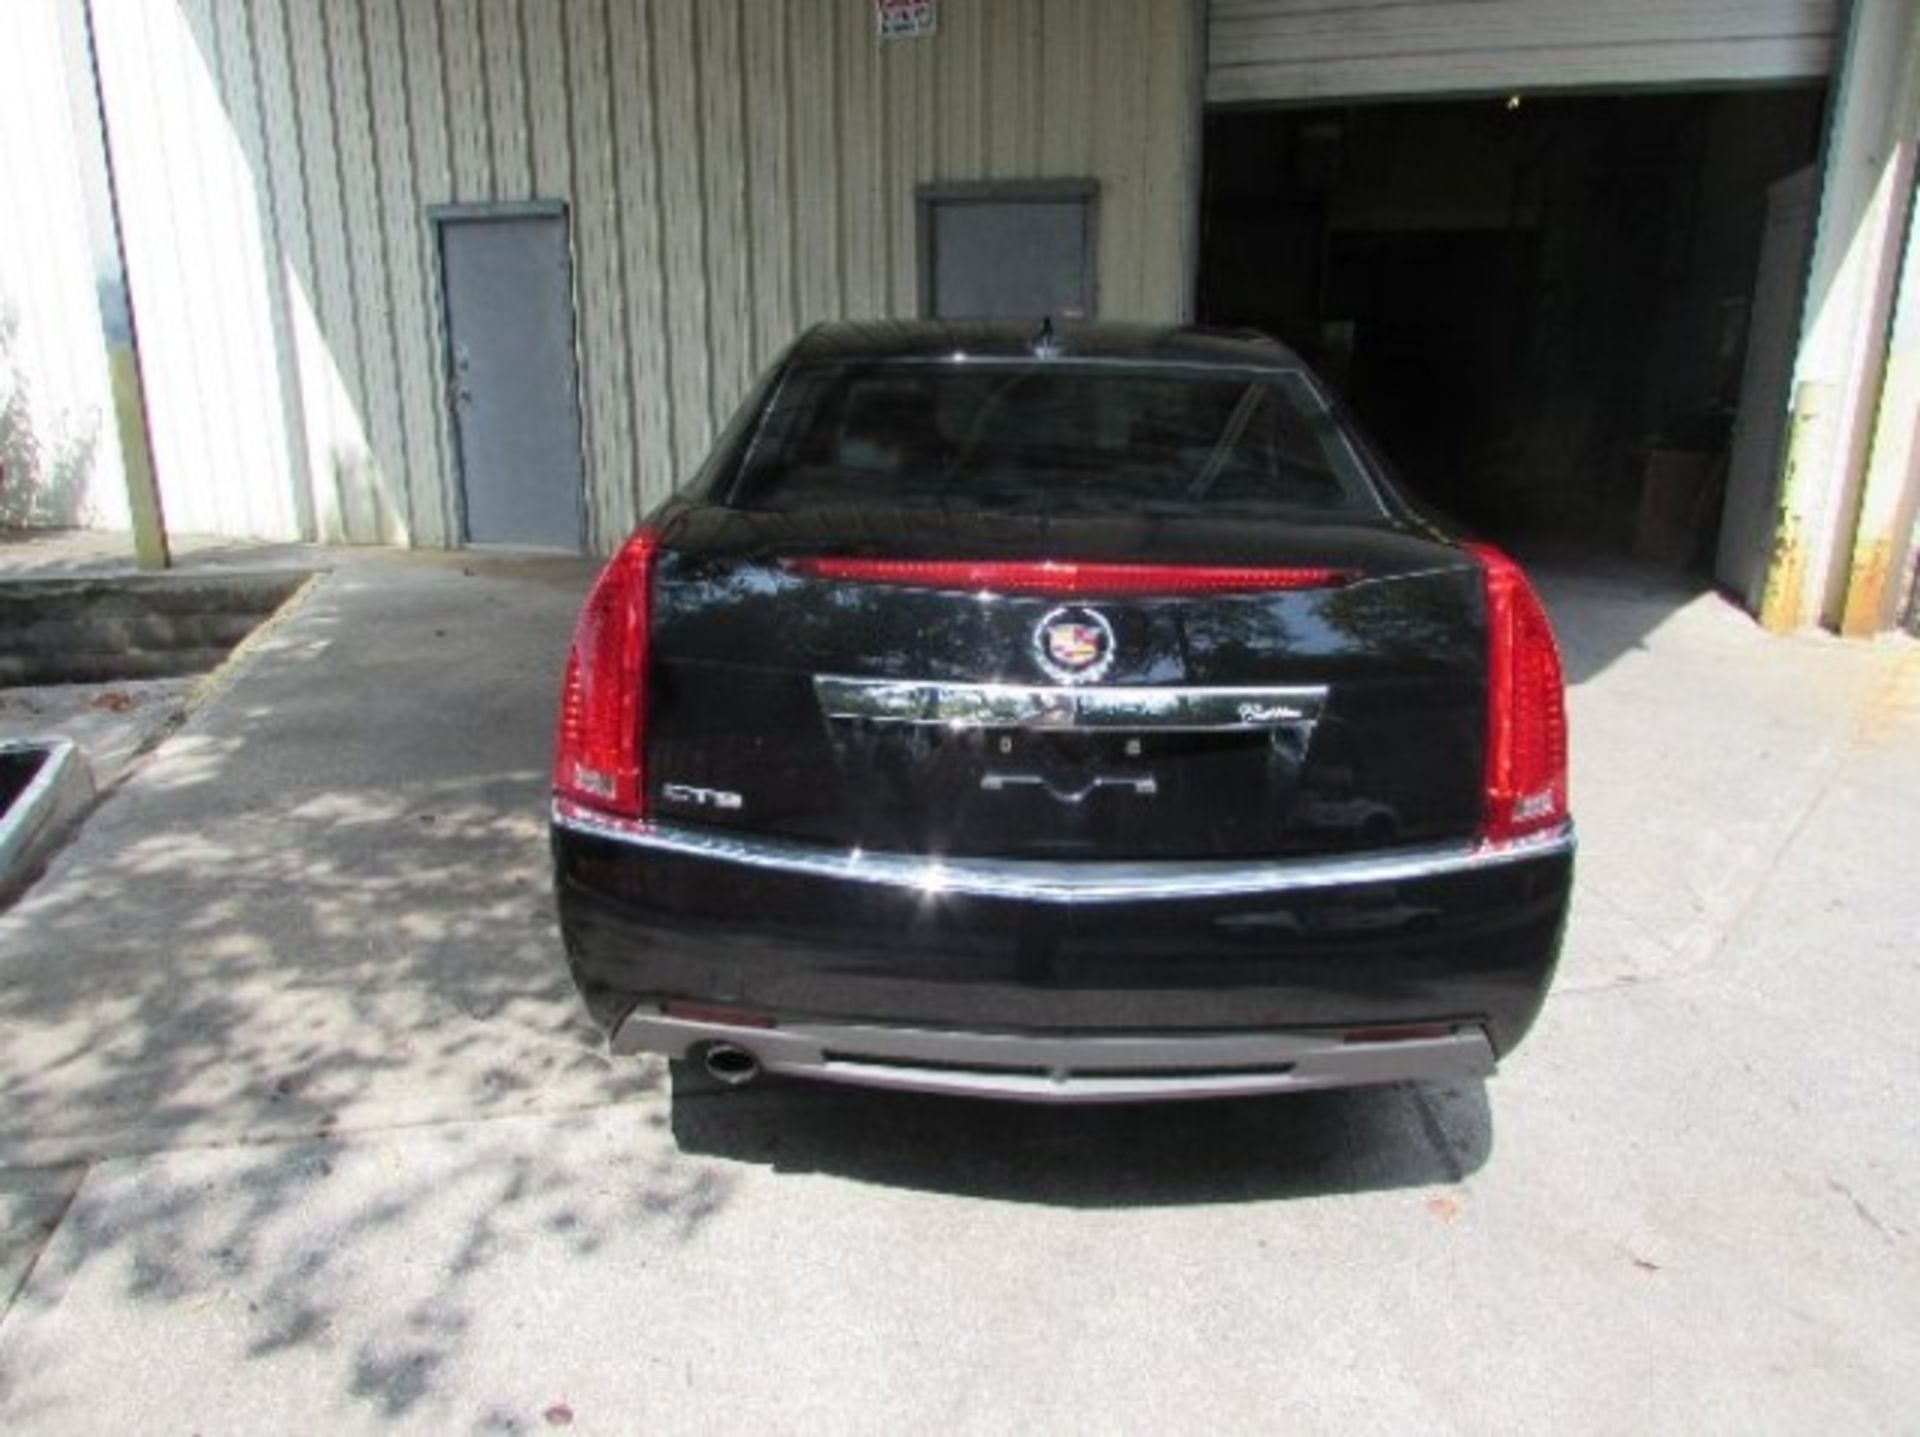 2011 Cadillac CTS, V6, Auto, leather, power windows, power doors, Loaded , ODO 75,391, VIN# - Image 2 of 4